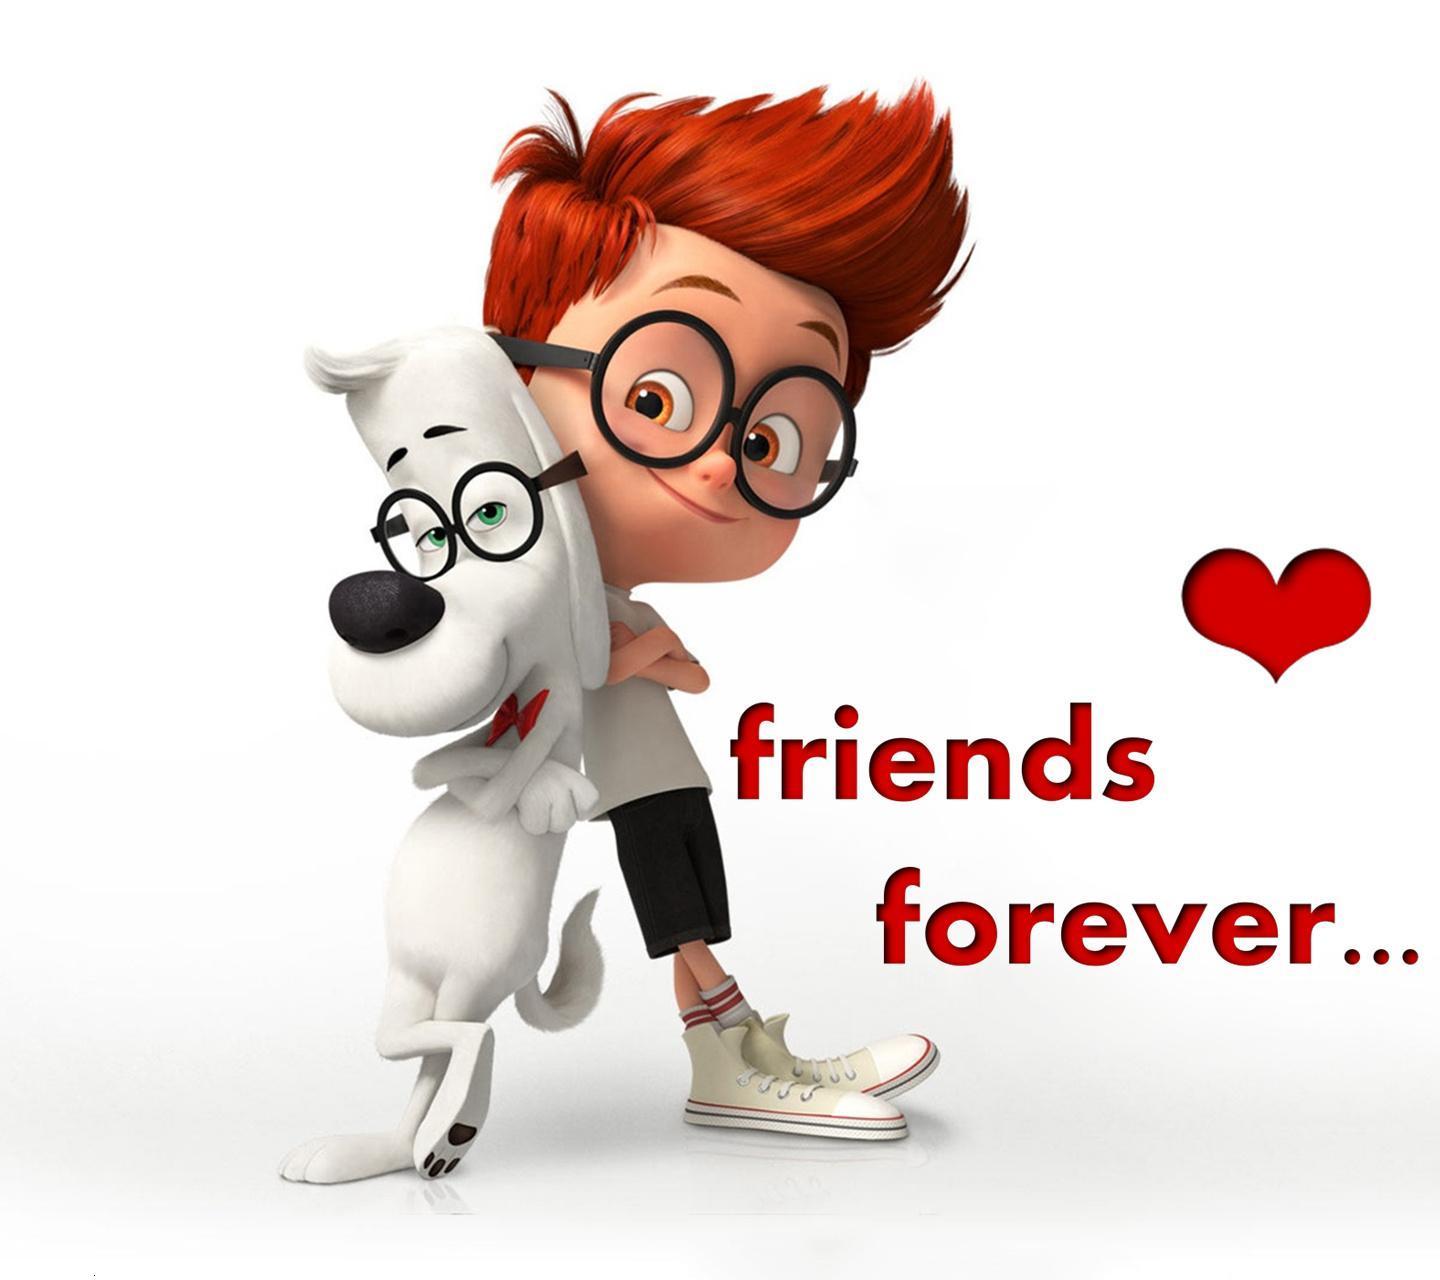 Download friends Forever Image Wallpaper For Mobile